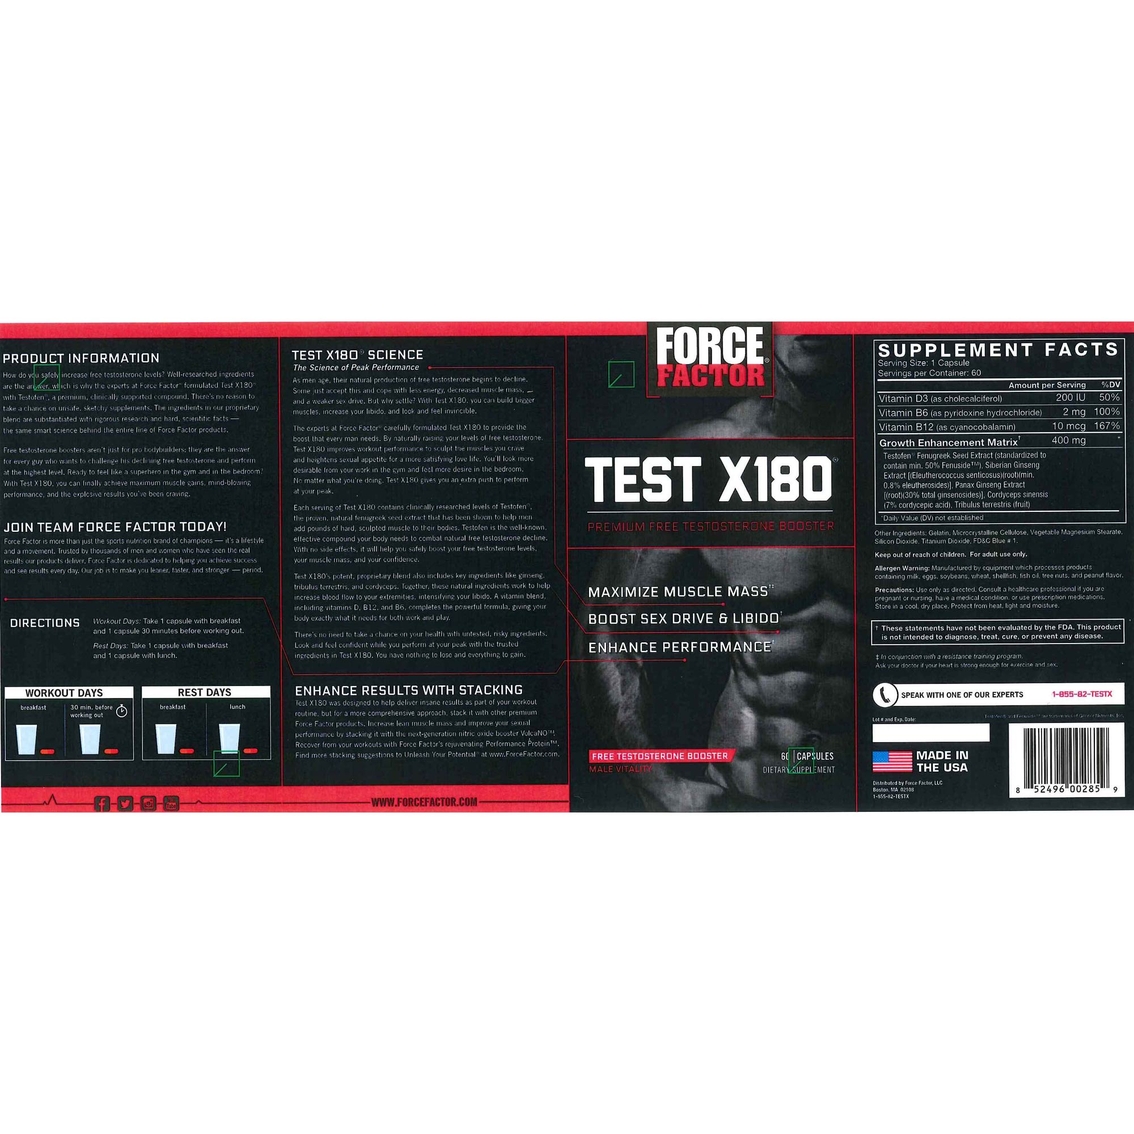 Force Factor Test X180 Sports Nutrition Supplement 60 Pk. - Image 2 of 2